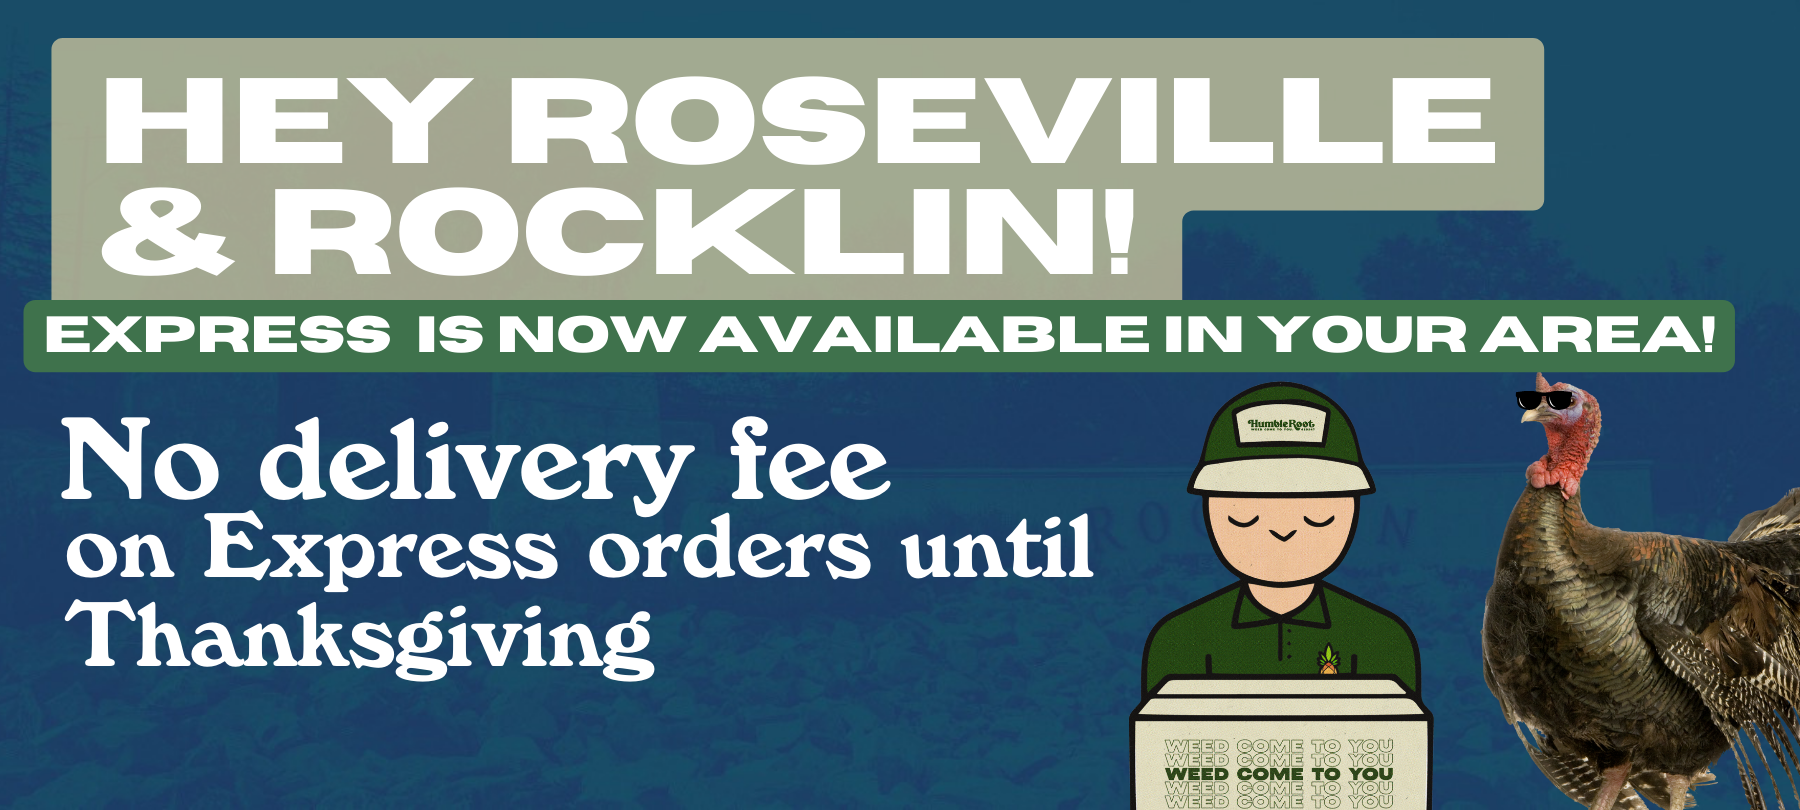 Express is available in Roseville & Rocklin!